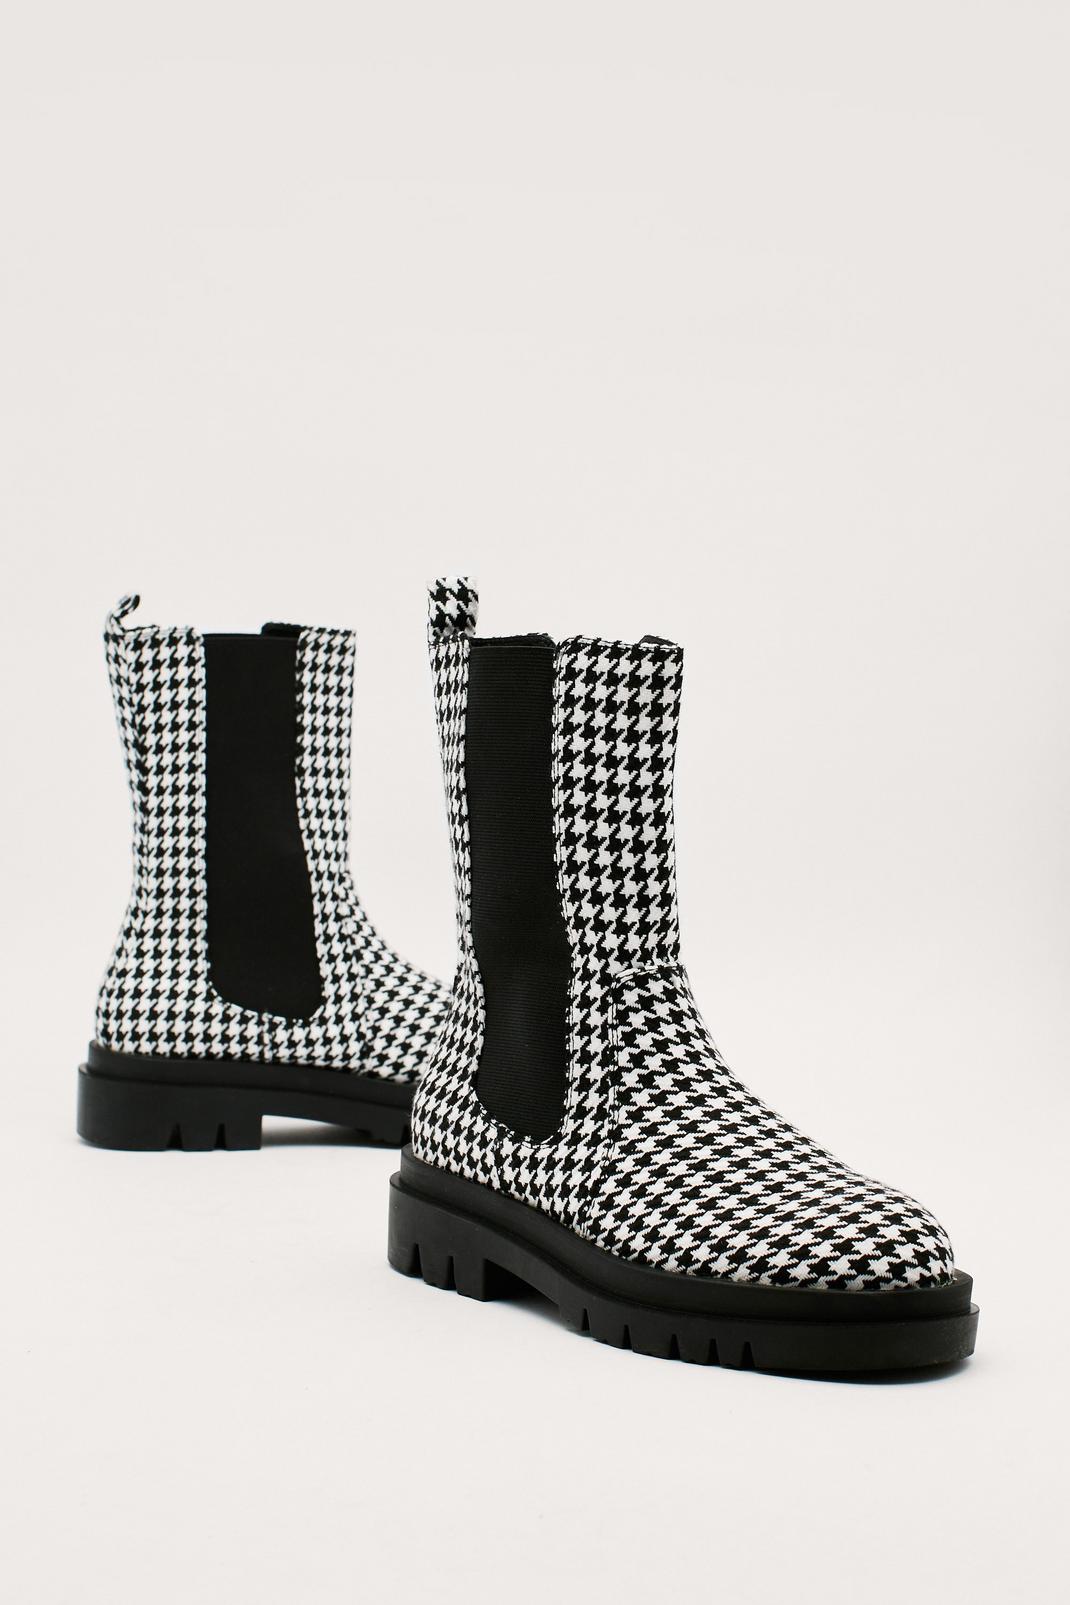 Black_white Houndstooth Chunky High Ankle Chelsea Boots image number 1